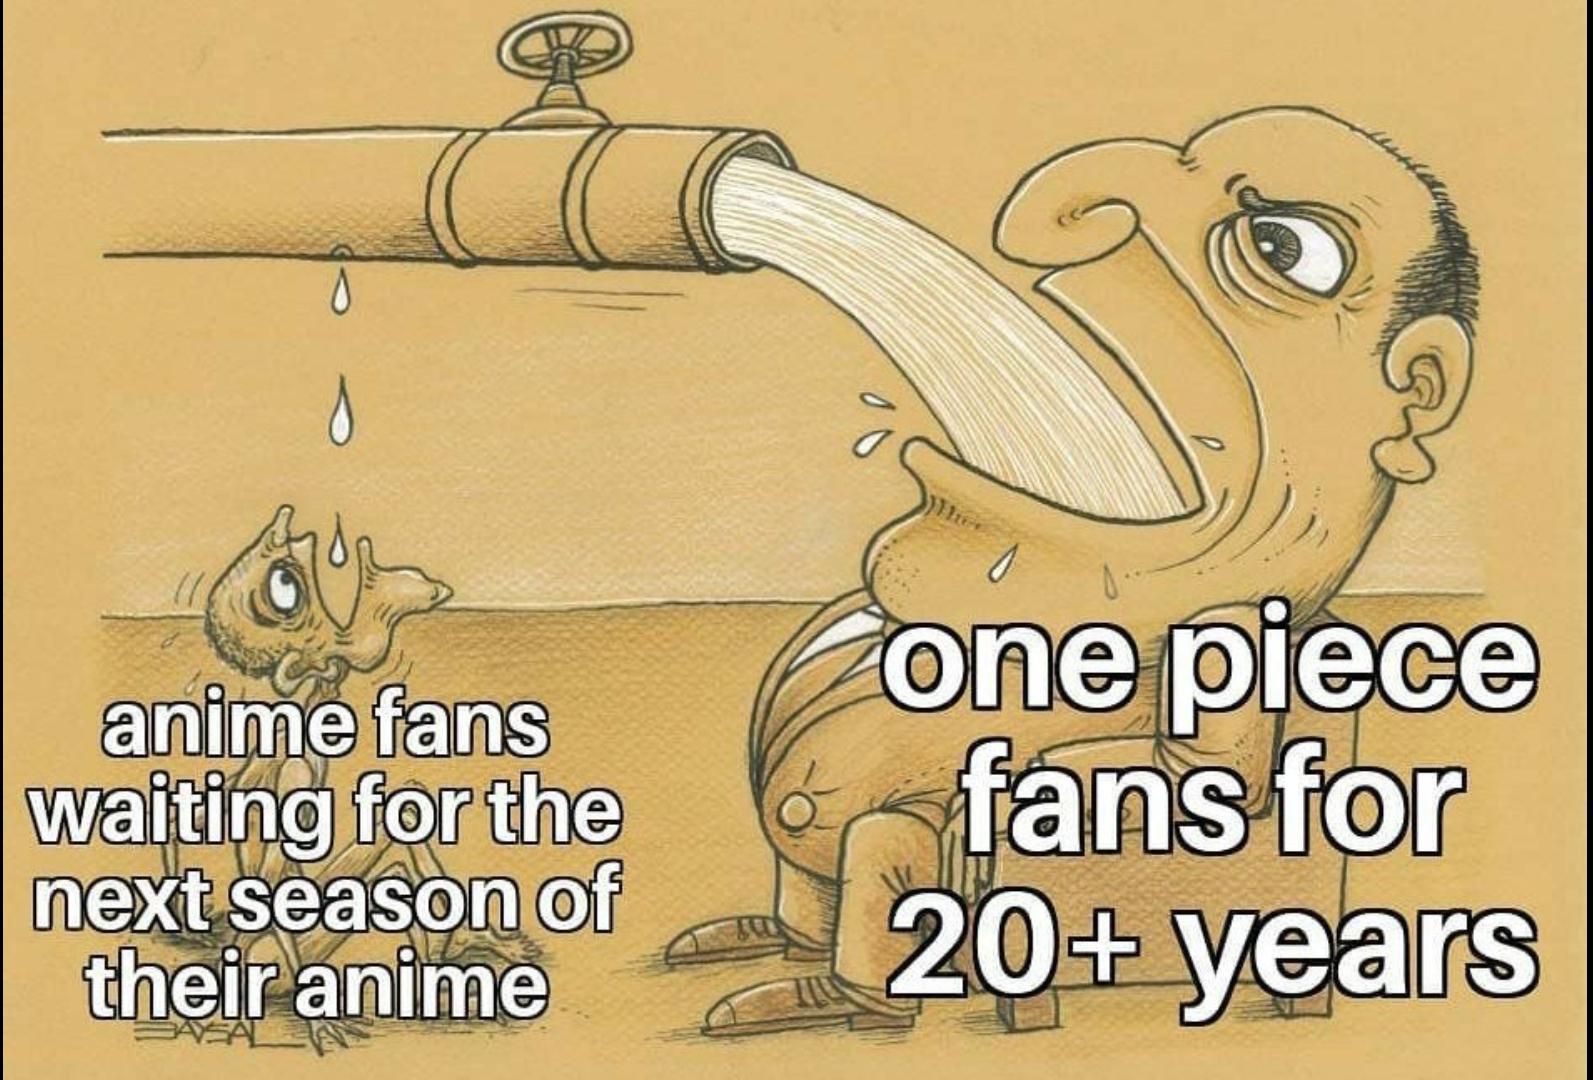 Still is the best anime